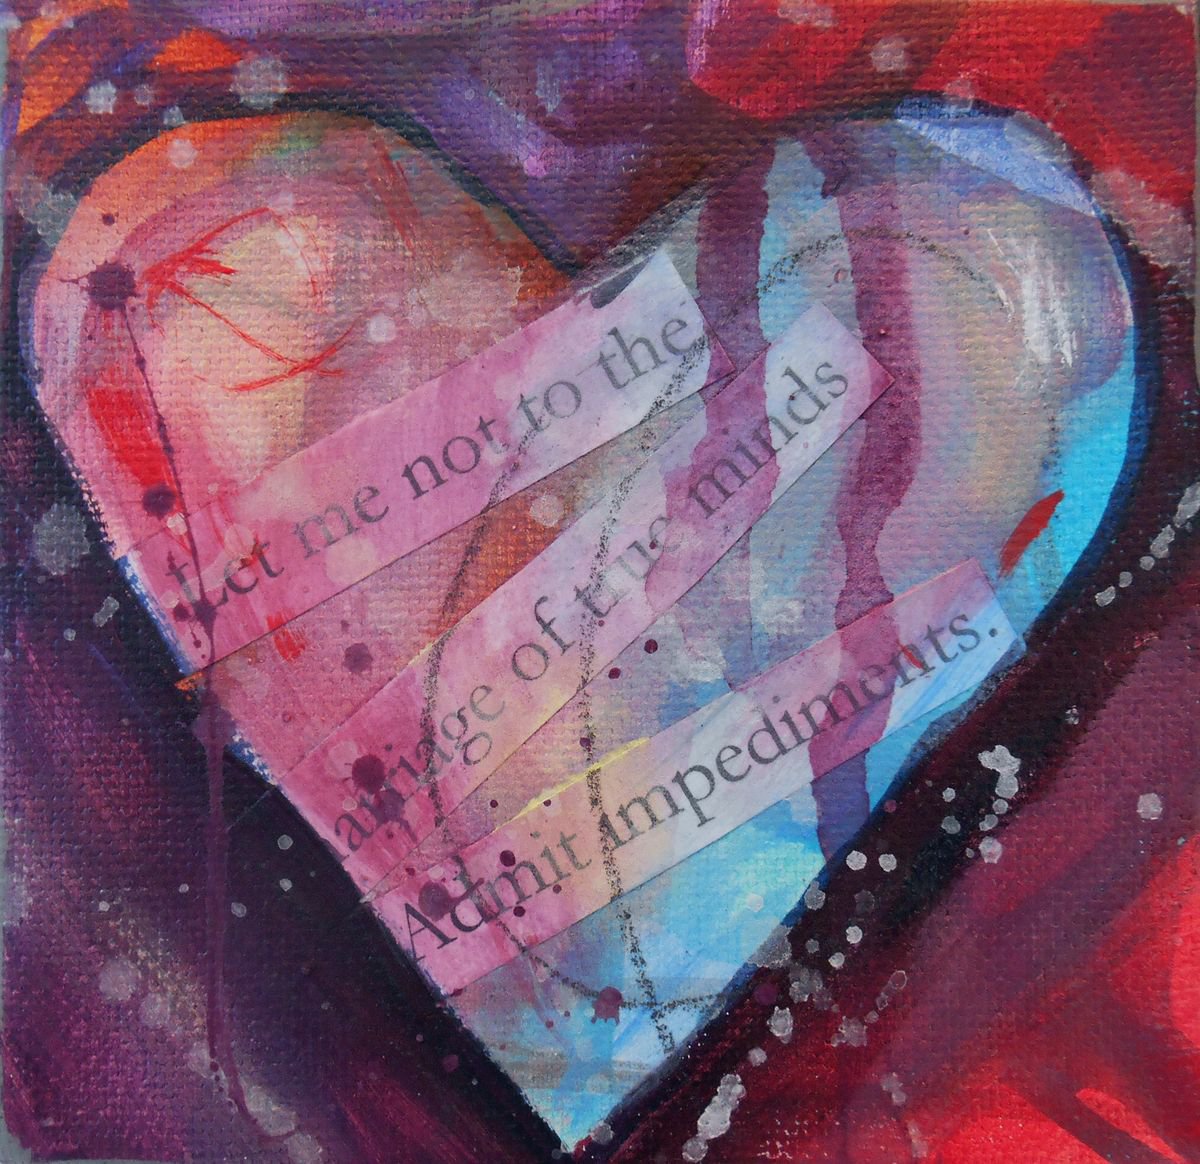 Marriage of True Minds - Abstract Art - 4 x 4 IN / 10 x 10 CM - Mini Heart Painting on Can... by Cynthia Ligeros